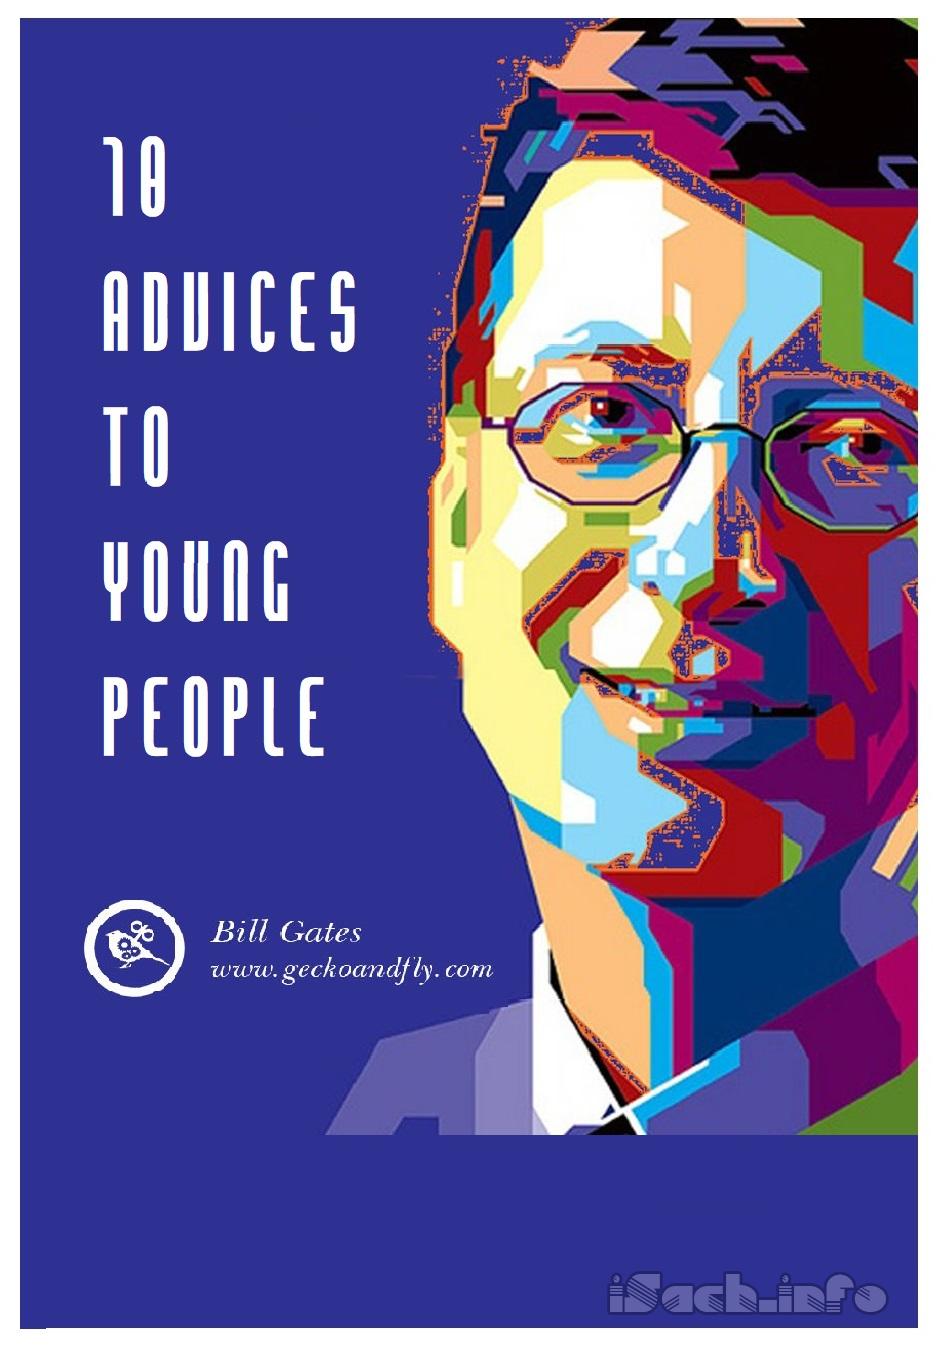 Bill Gates’ 10 advices to young people